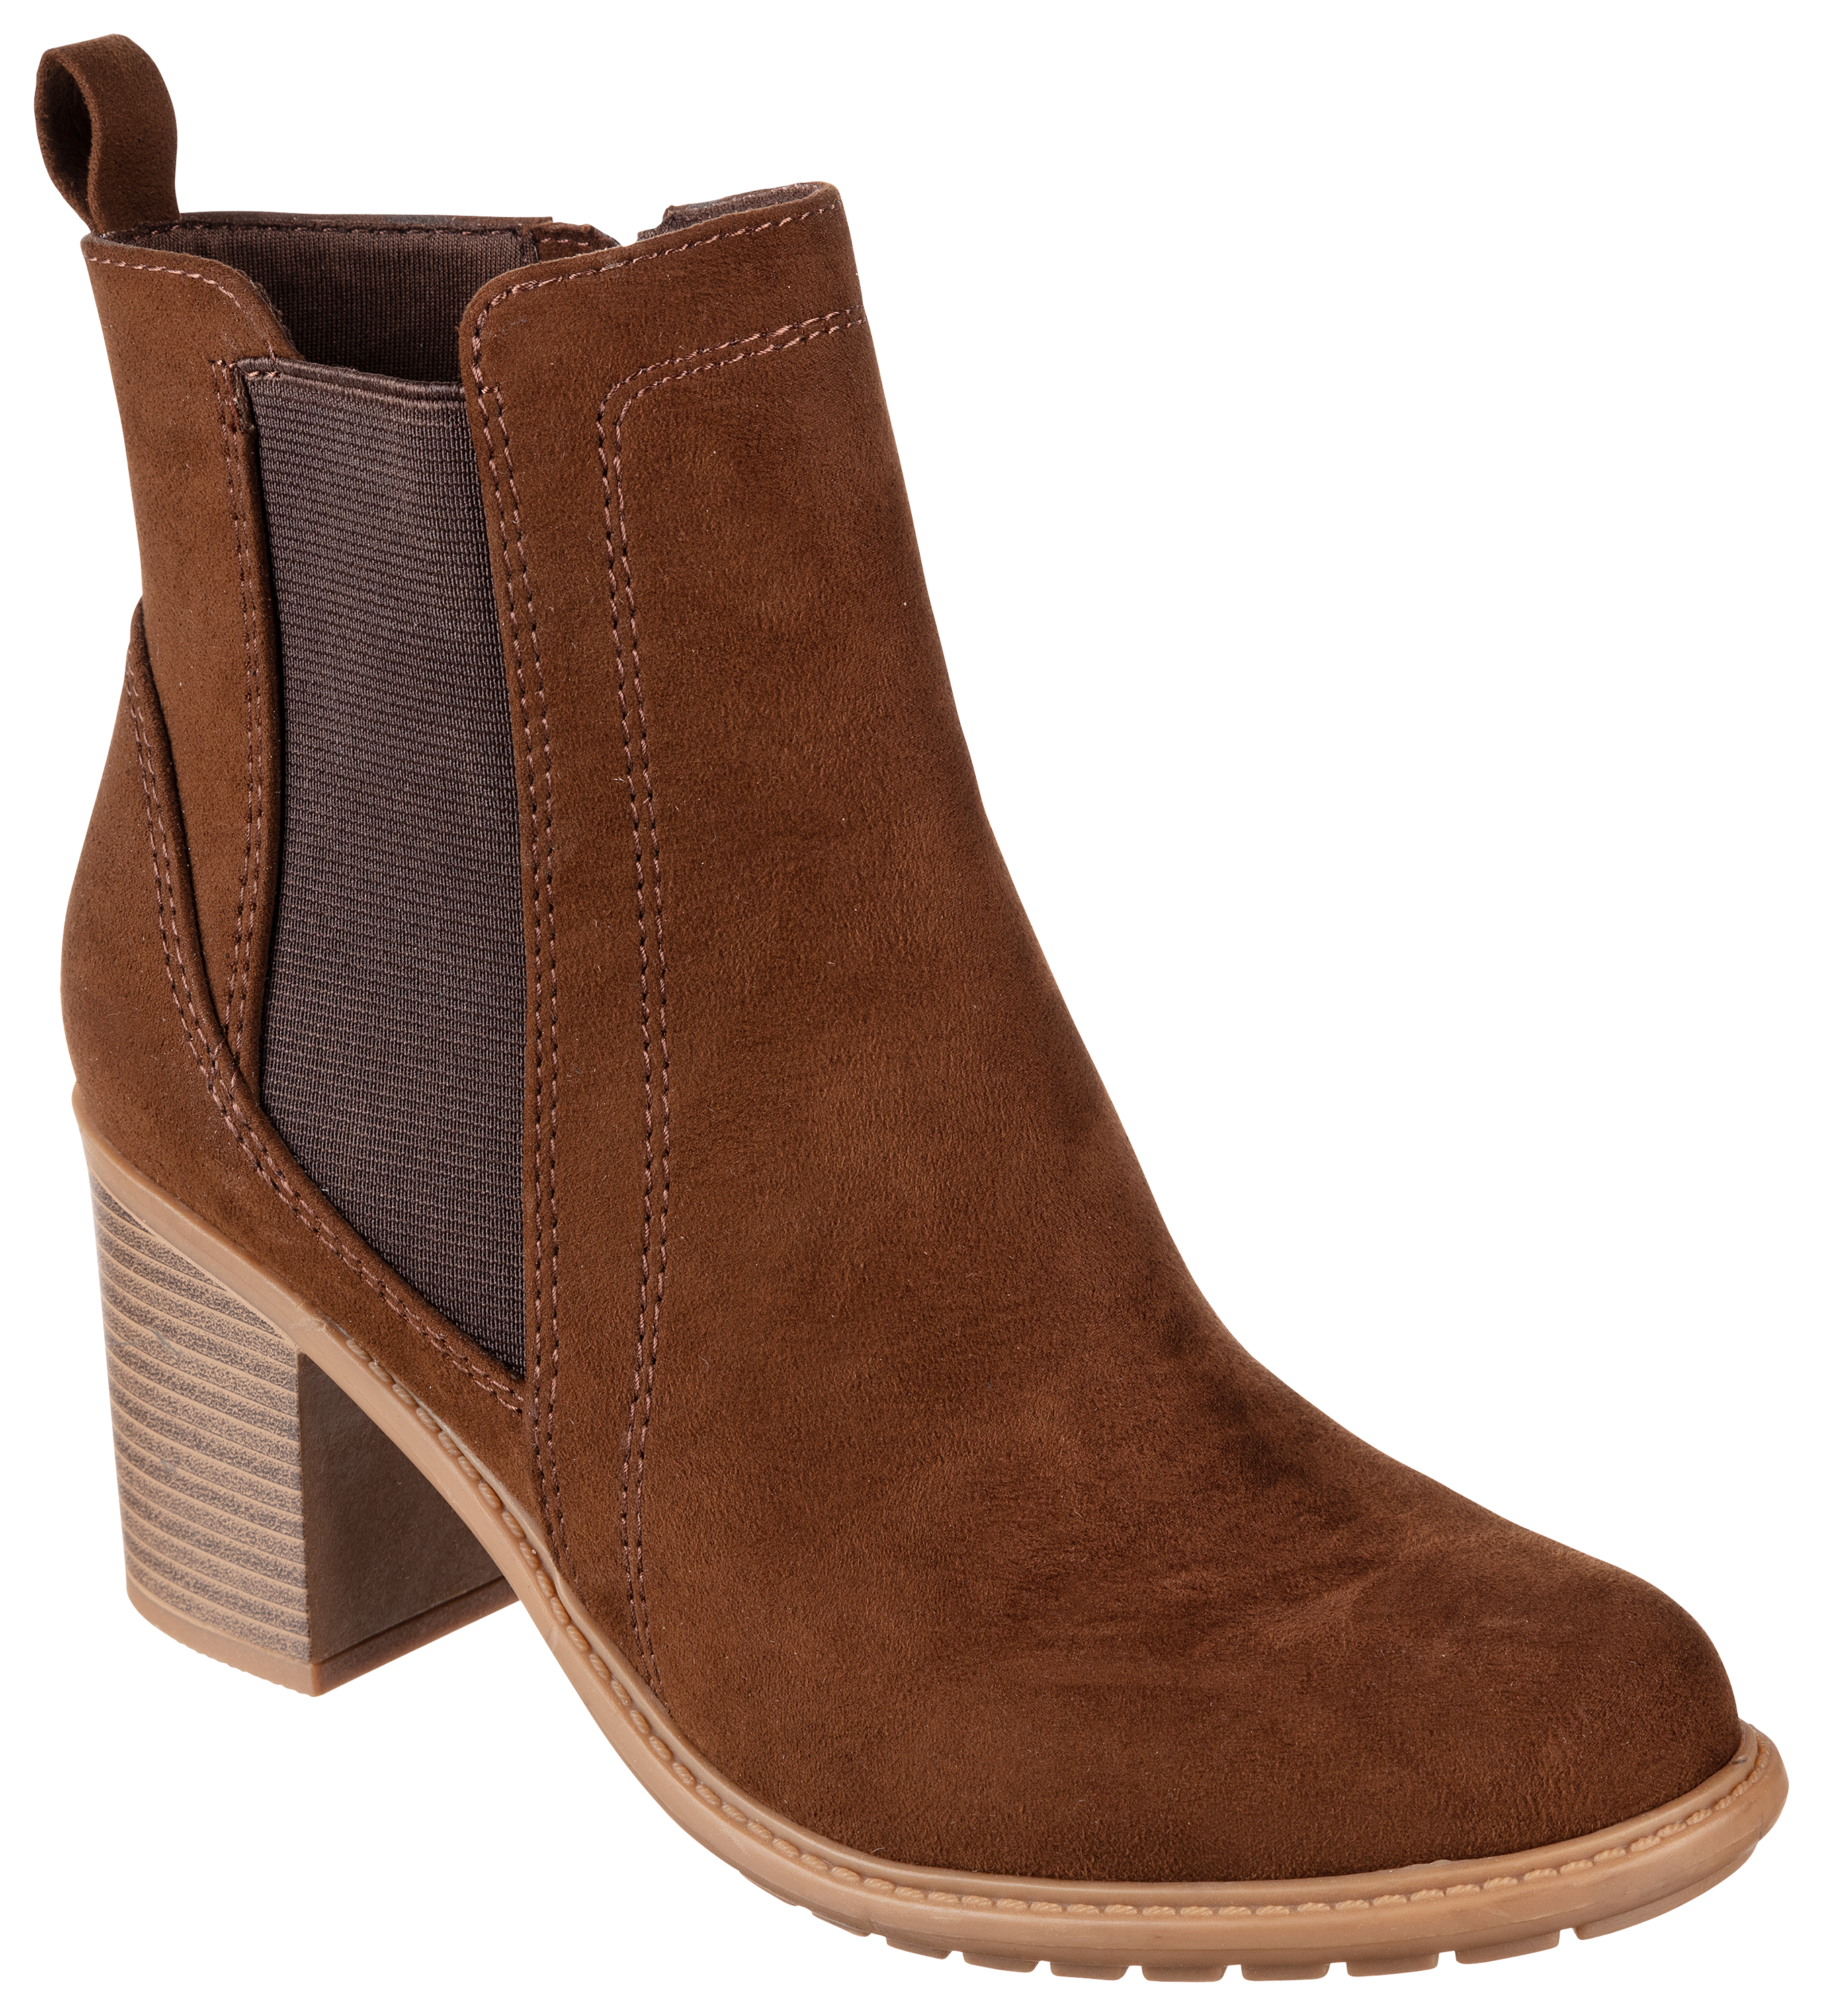 Natural Reflections Natalie II Boots for Ladies - Brown - 10M